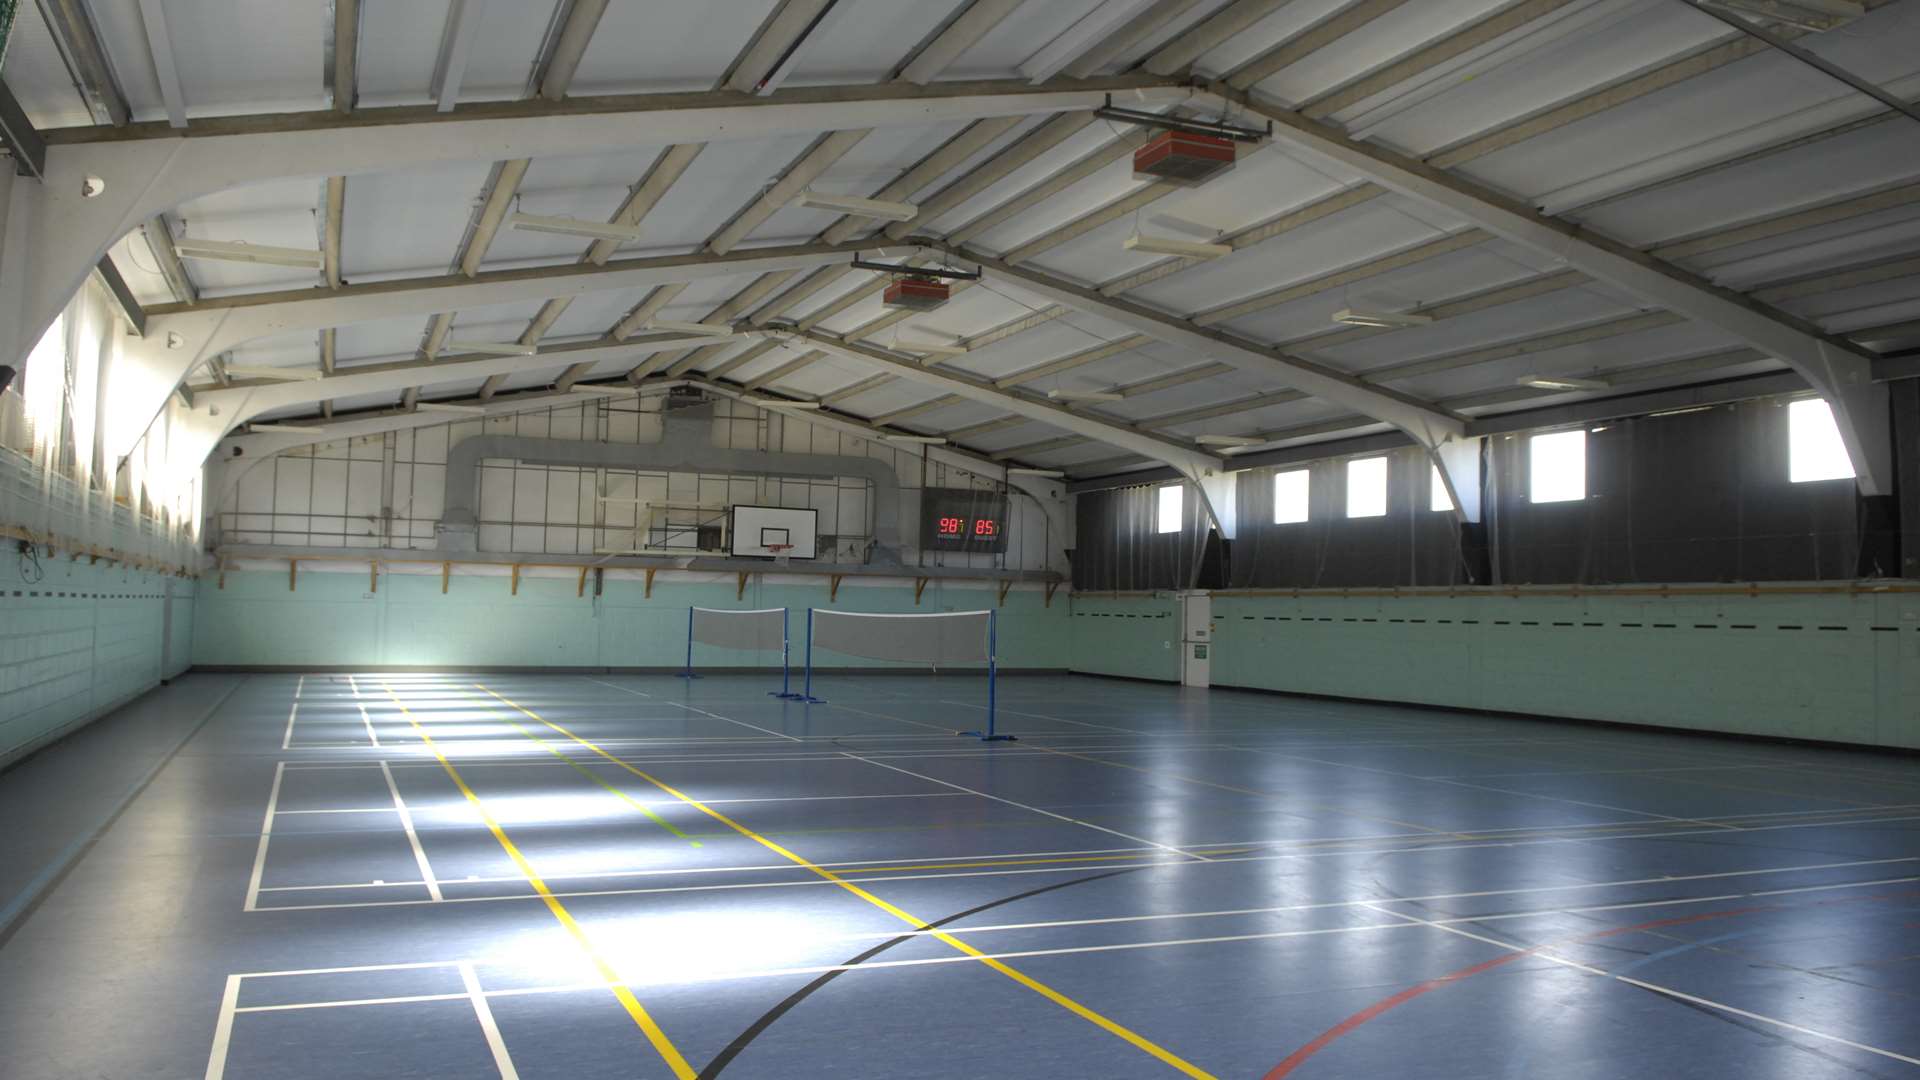 The sports hall at Baypoint